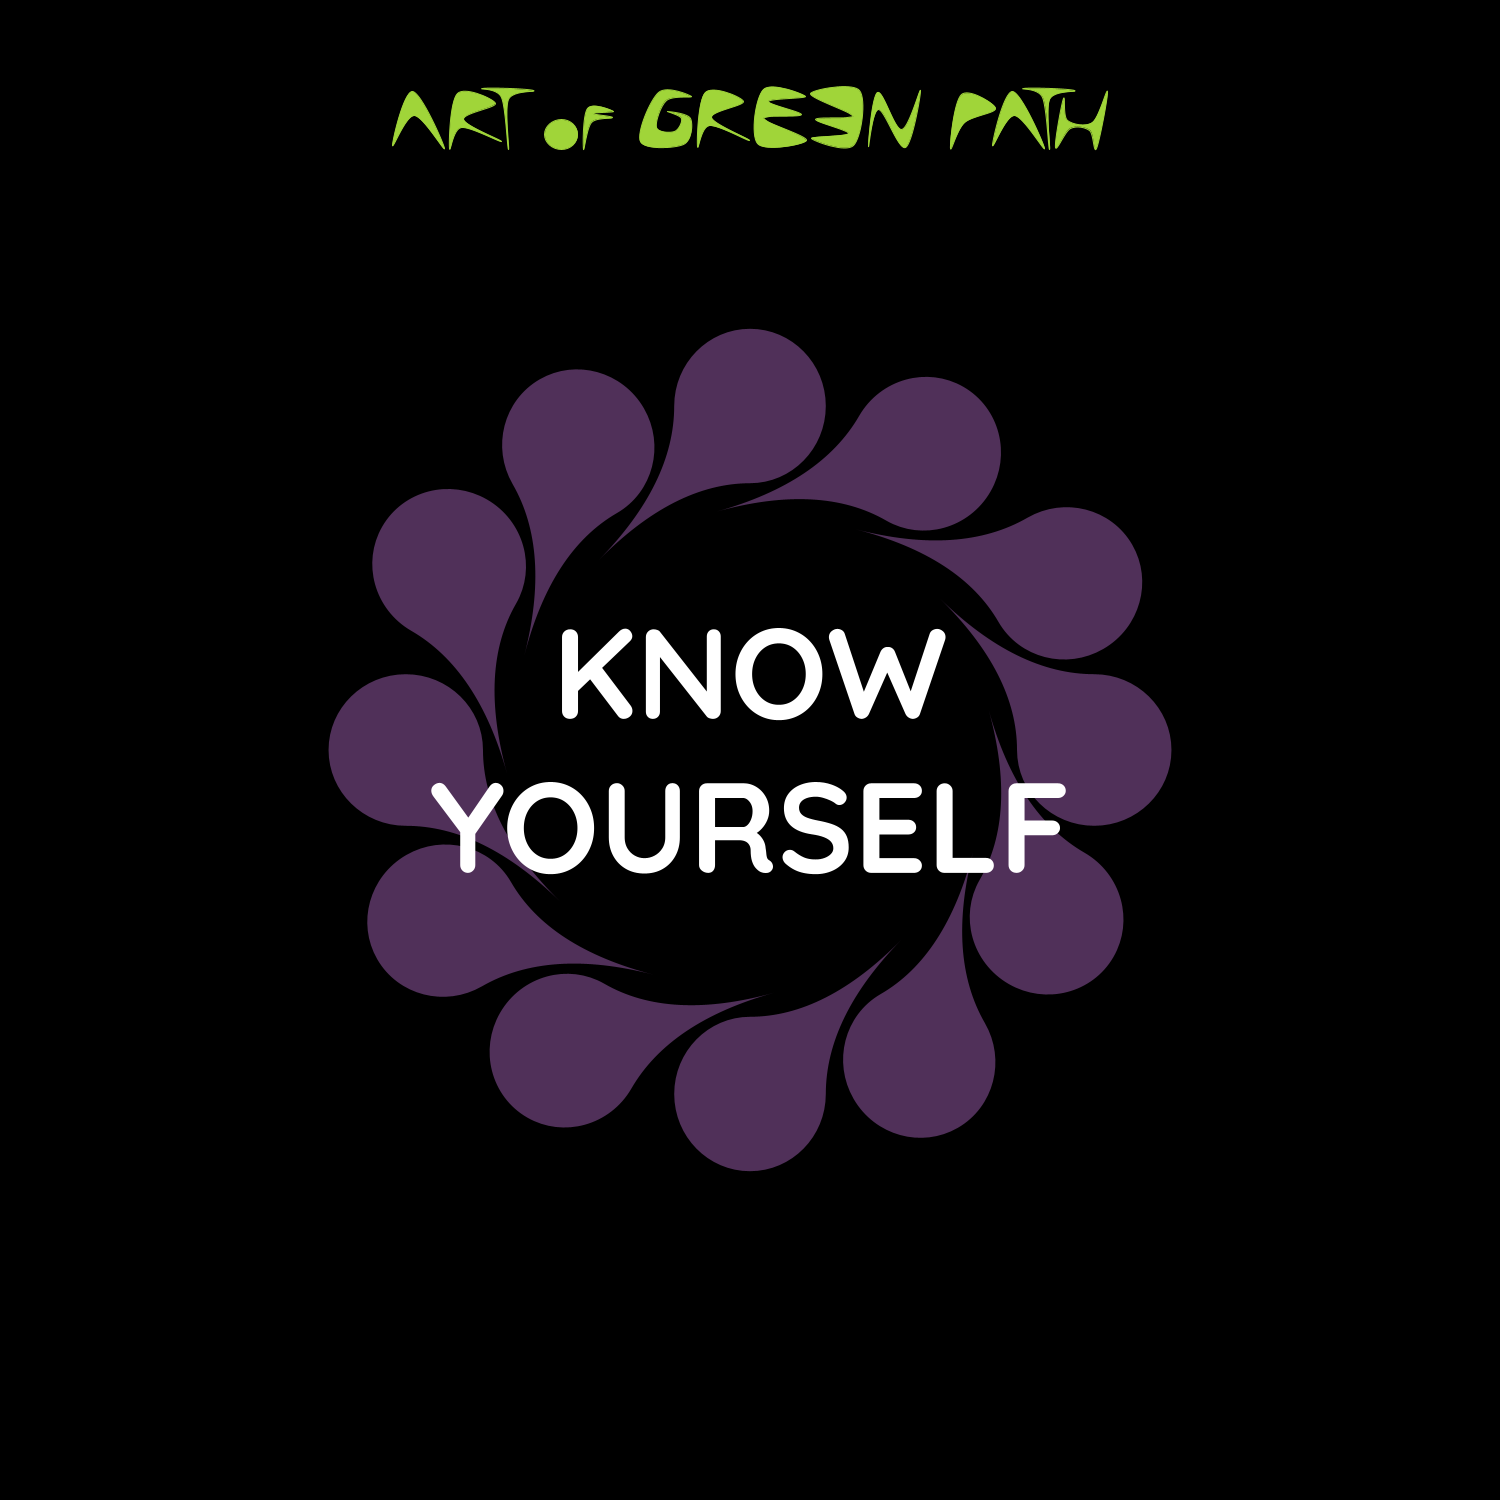 ART OF GREEN PATH - KNOW YOURSELF